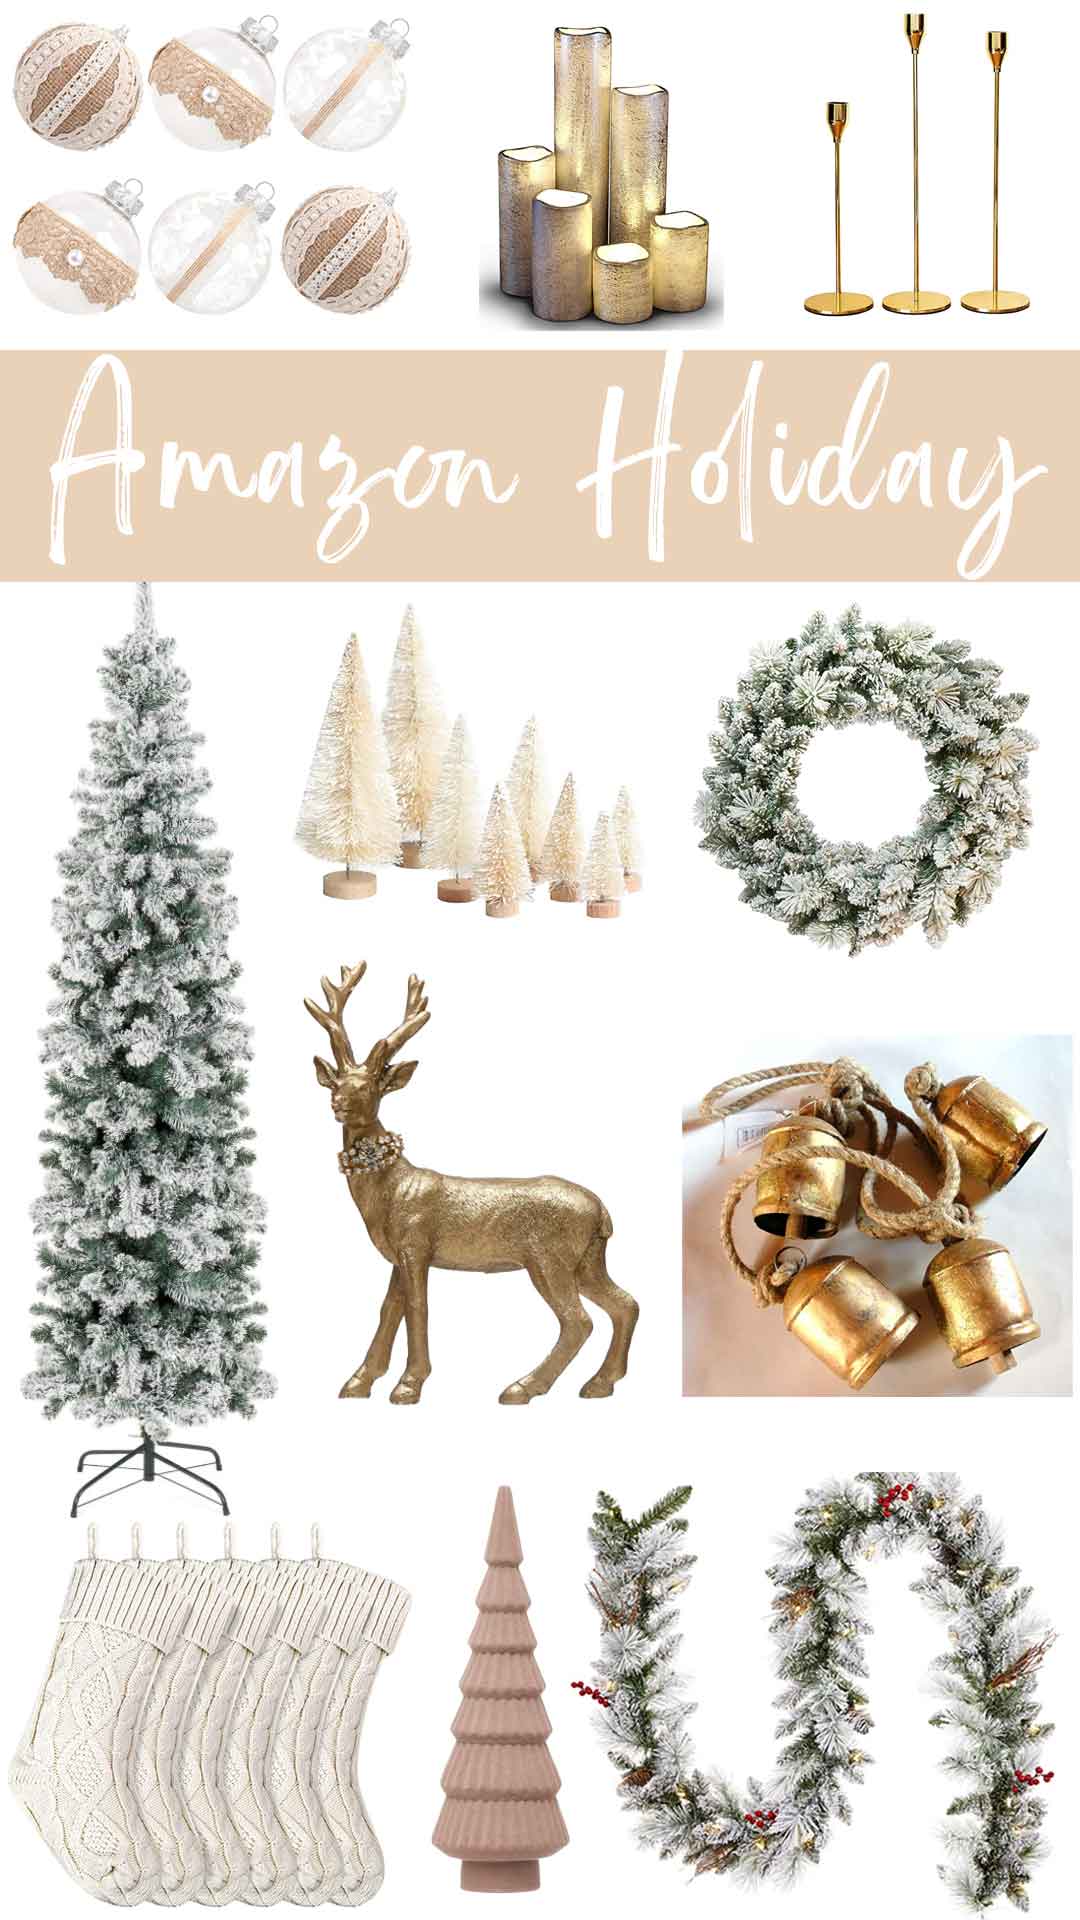 Amazon holiday decor finds, neutral classic picks on a budget